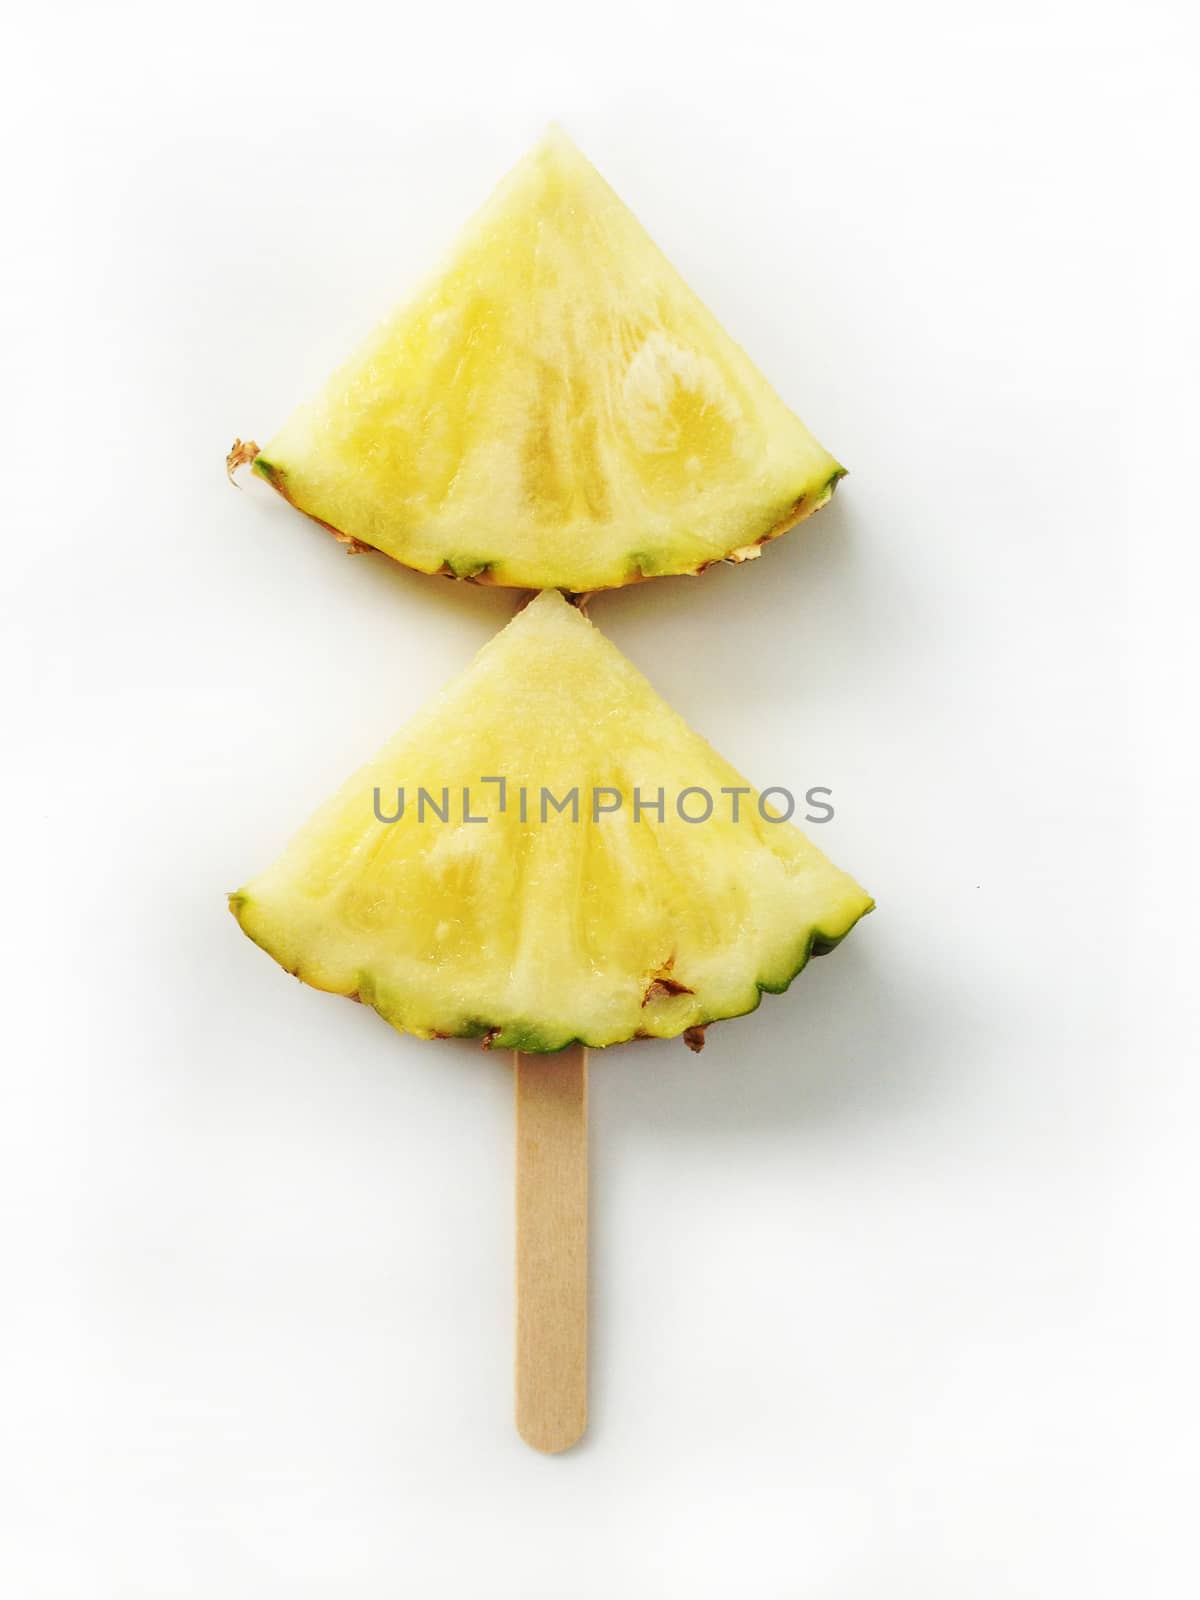 Pineapple slices isolated with popsicle sticks on white background